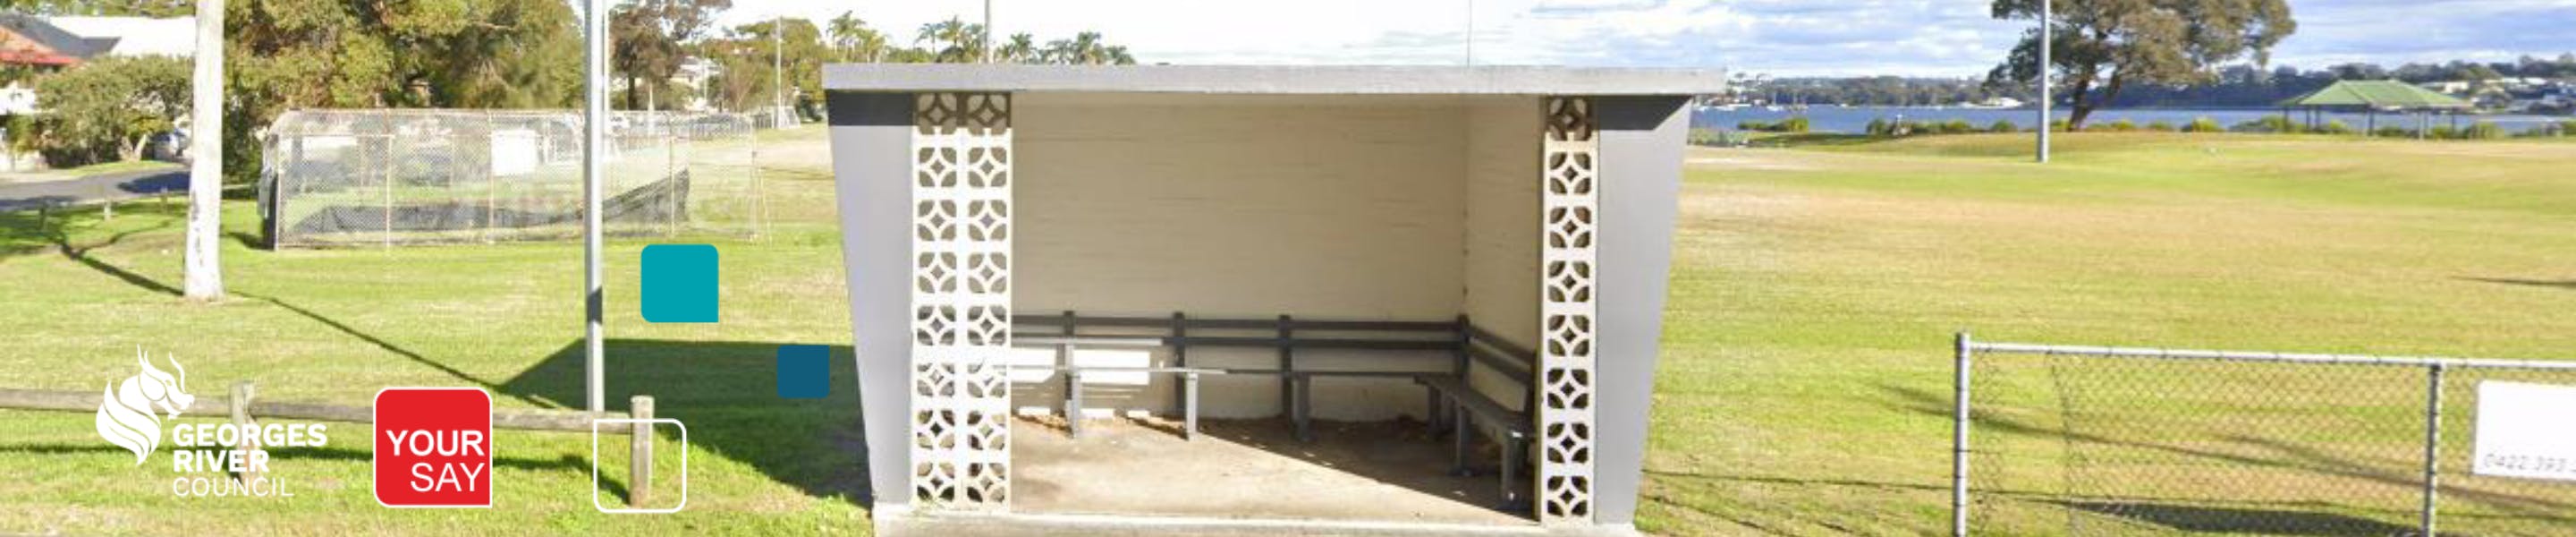 Site image, Claydon Reserve Bus Shelter, Ramsgate Road, Kogarah Bay, New South Wales.